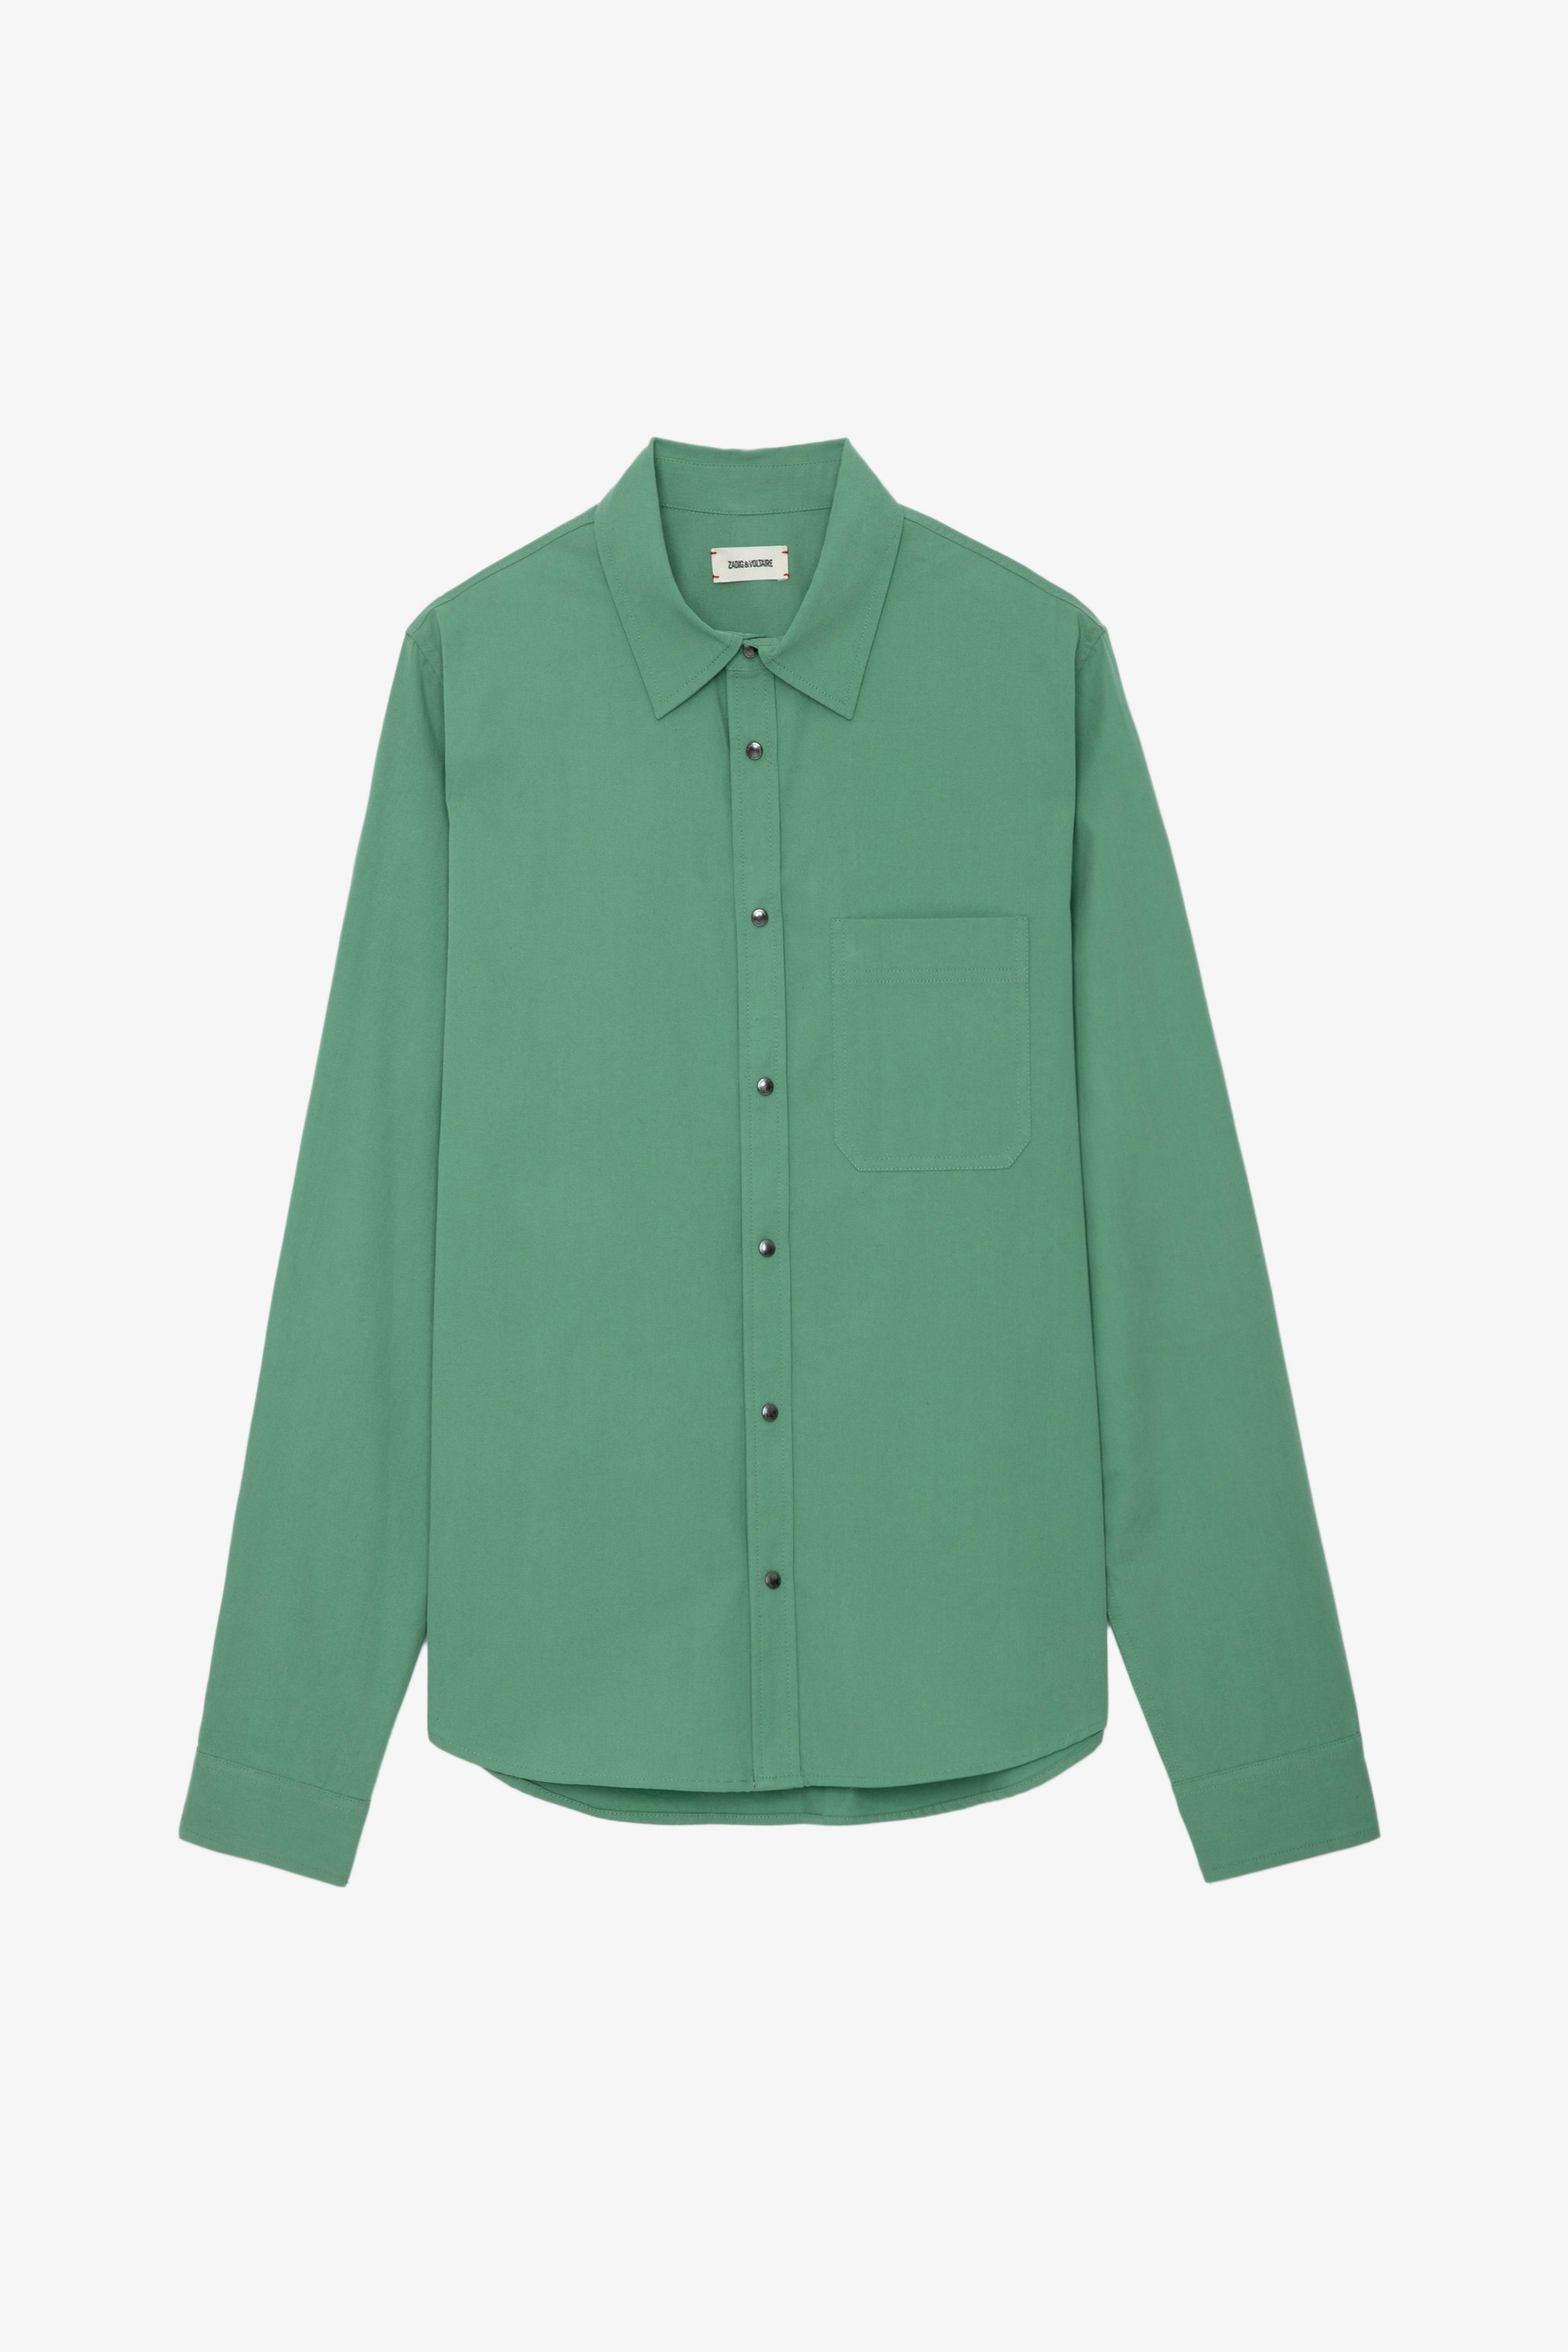 Stan Shirt - Green cotton twill shirt with patch pocket and customised details designed by Humberto Cruz.